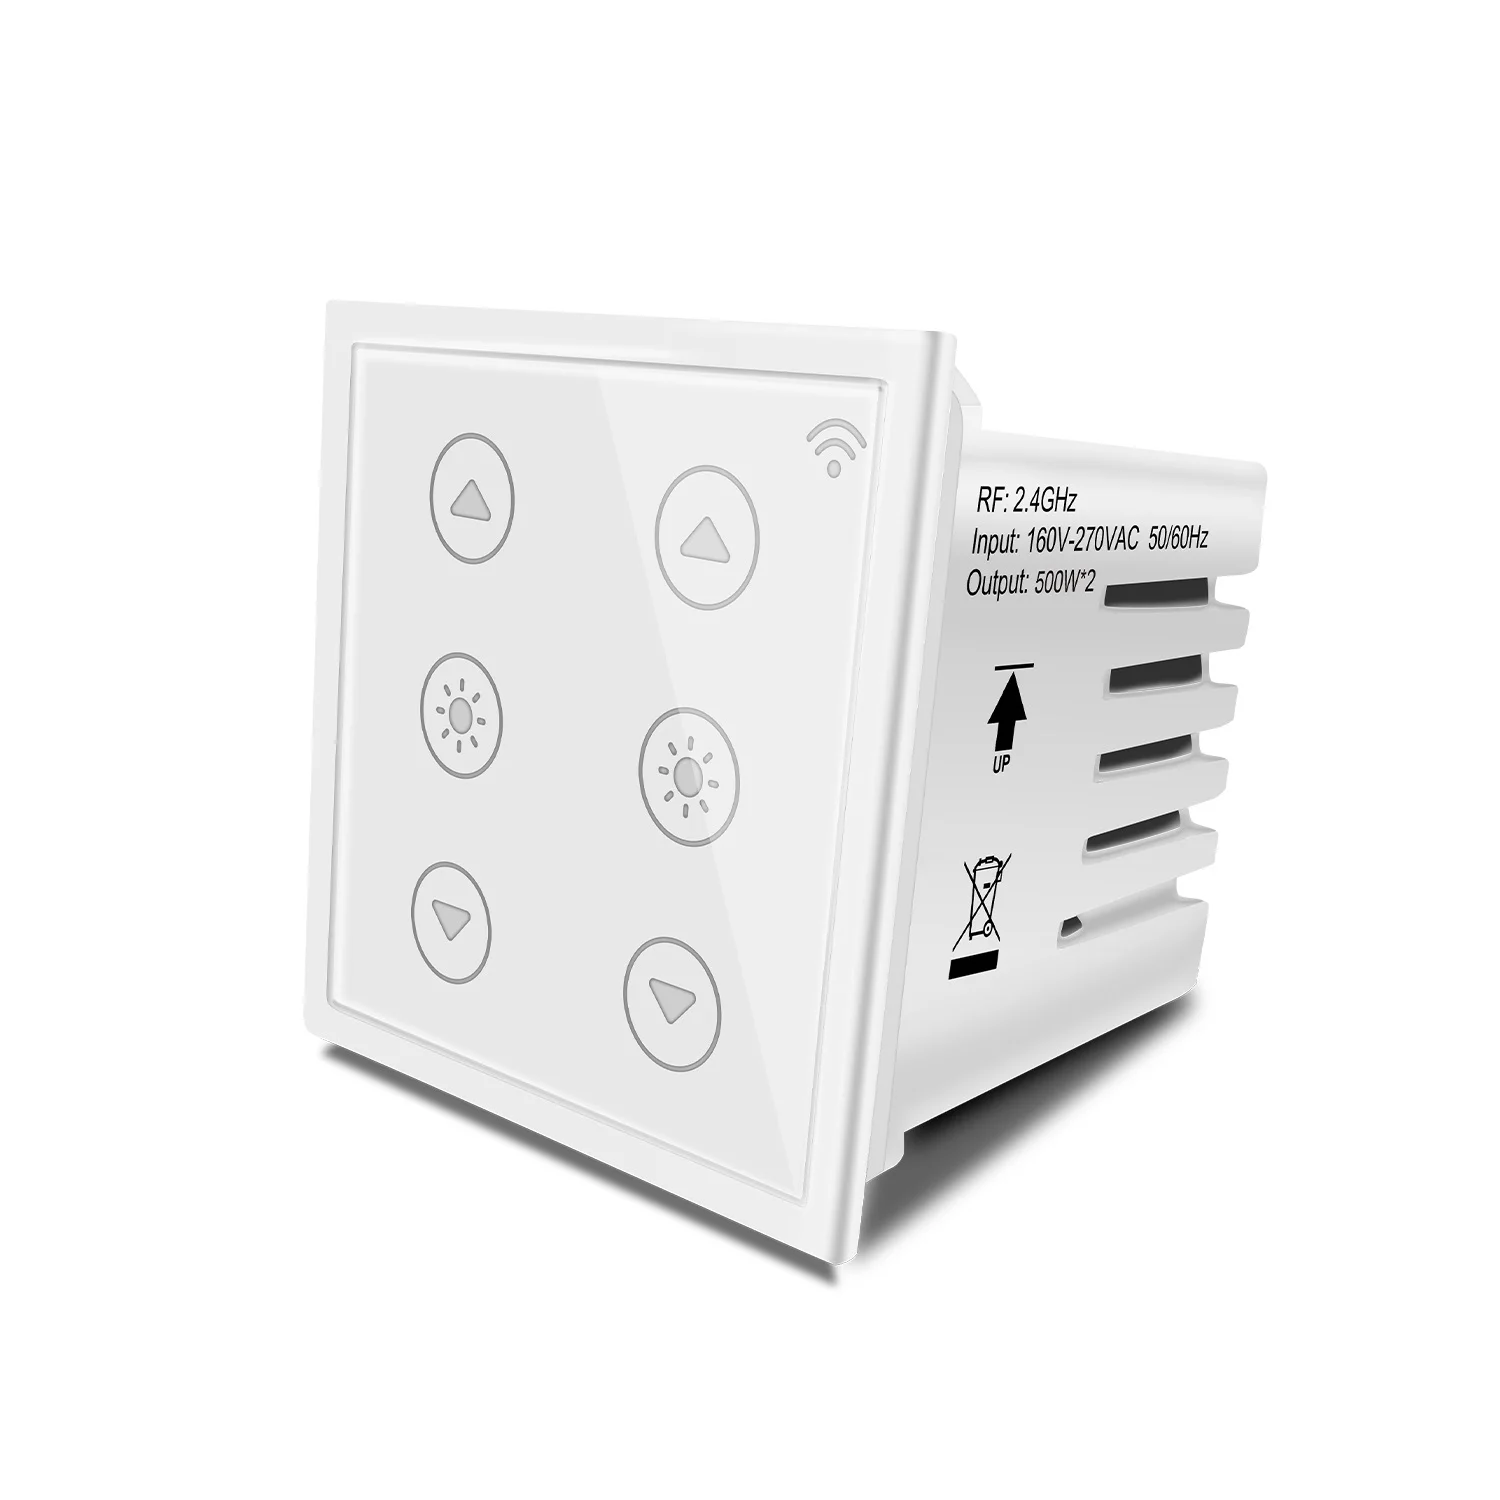 EVA LOGIK 520D Smart Wall Wireless Light 230V 2 Dimmers Remote Control Wifi Led Touch Dimmer Switch